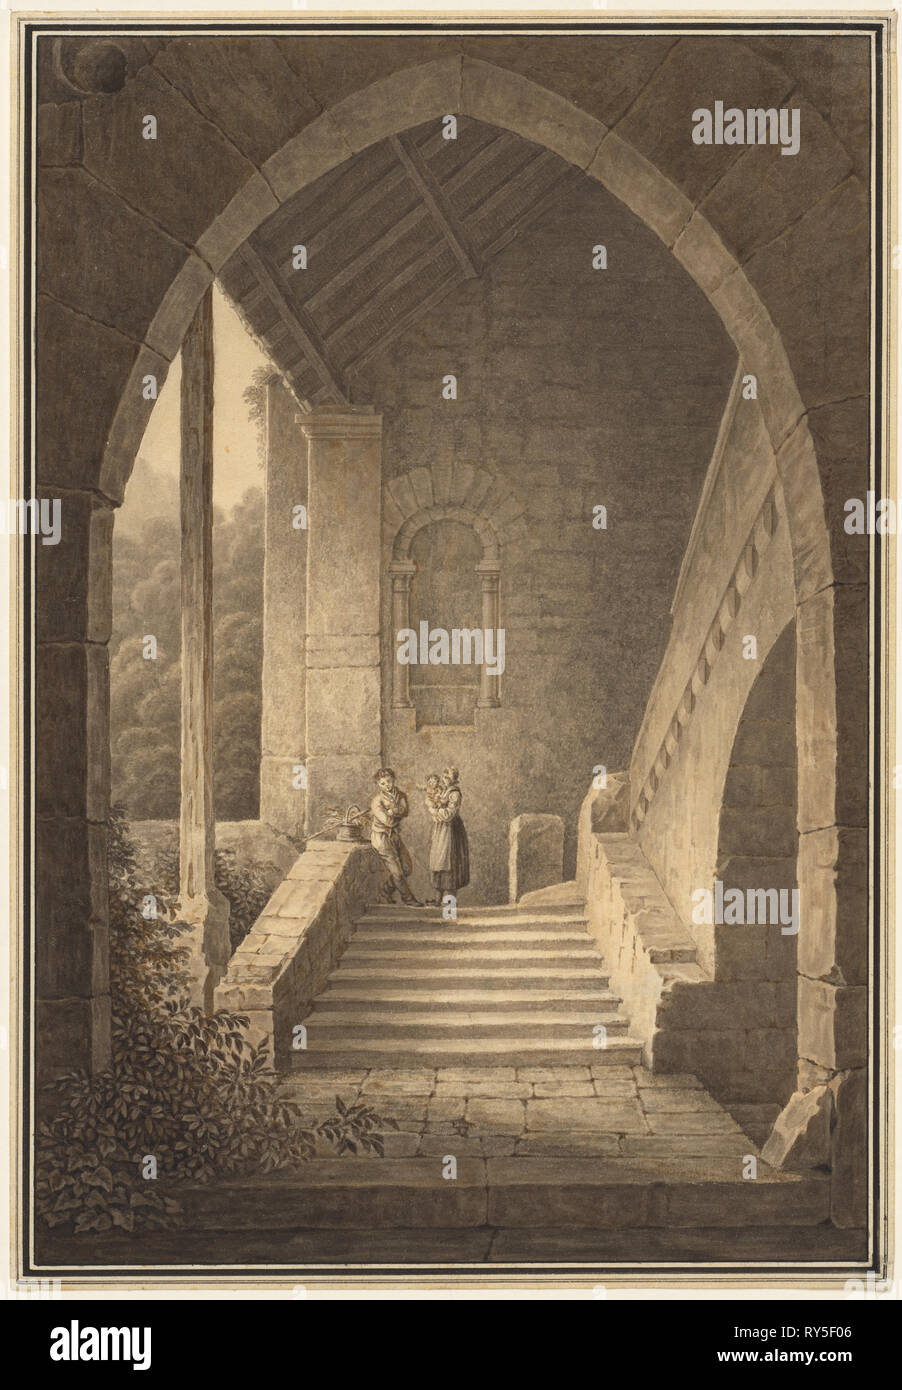 Outer Staircase of a Gothic Ruin (Treppenaufgang einer gotischen Ruine), 1830. Domenico Quaglio (German, 1787-1837). Gray and brown wash and framing lines in pen and black ink; sheet: 24.1 x 16.8 cm (9 1/2 x 6 5/8 in.); image: 23.2 x 15.2 cm (9 1/8 x 6 in Stock Photo